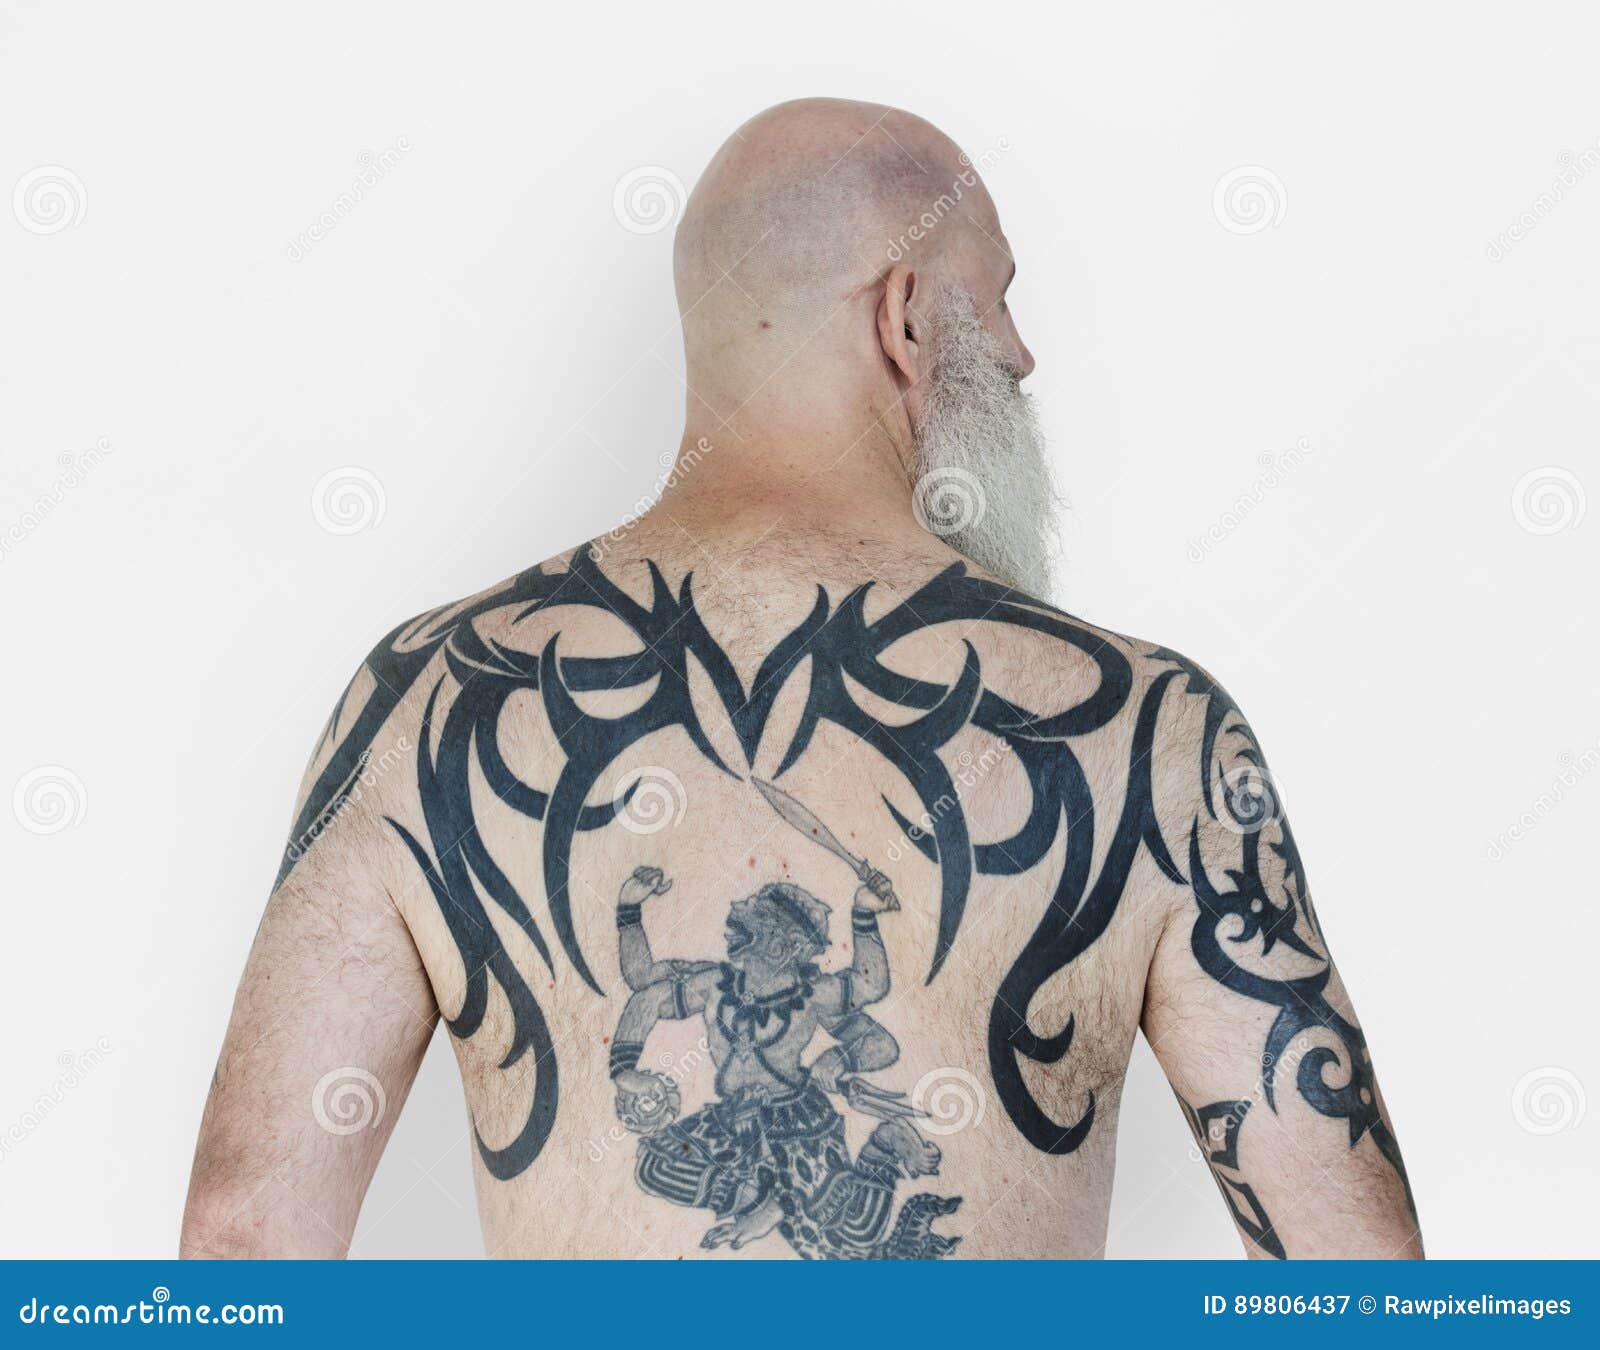 Tattooed Man Looking Upwards High View High-Res Stock Photo - Getty Images